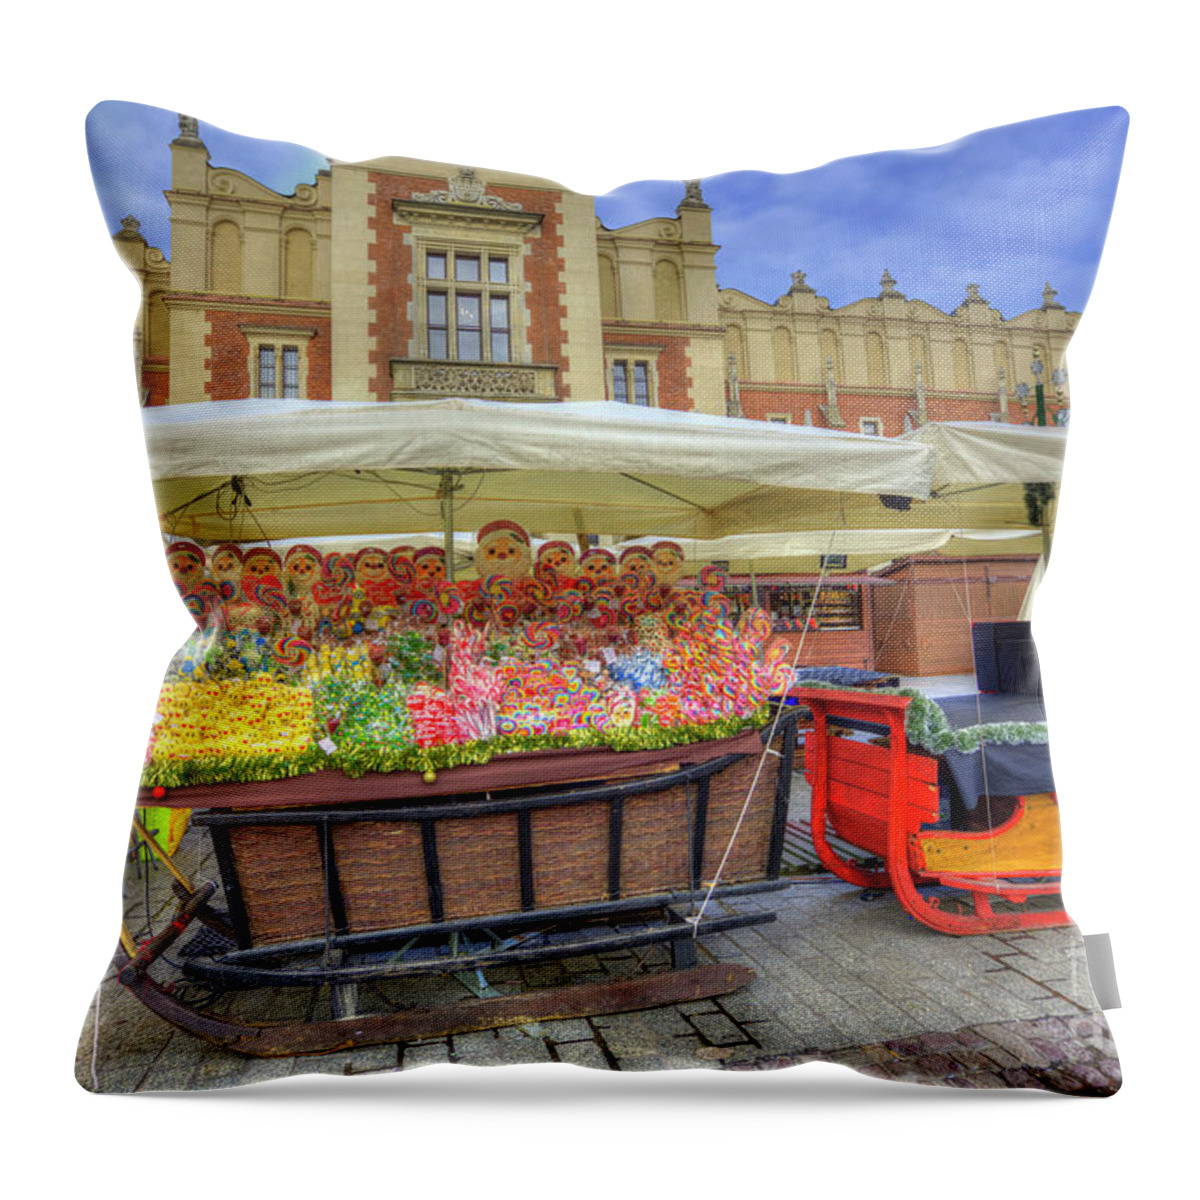 Advent Throw Pillow featuring the photograph Krakow Christmas Market 2017 by Juli Scalzi